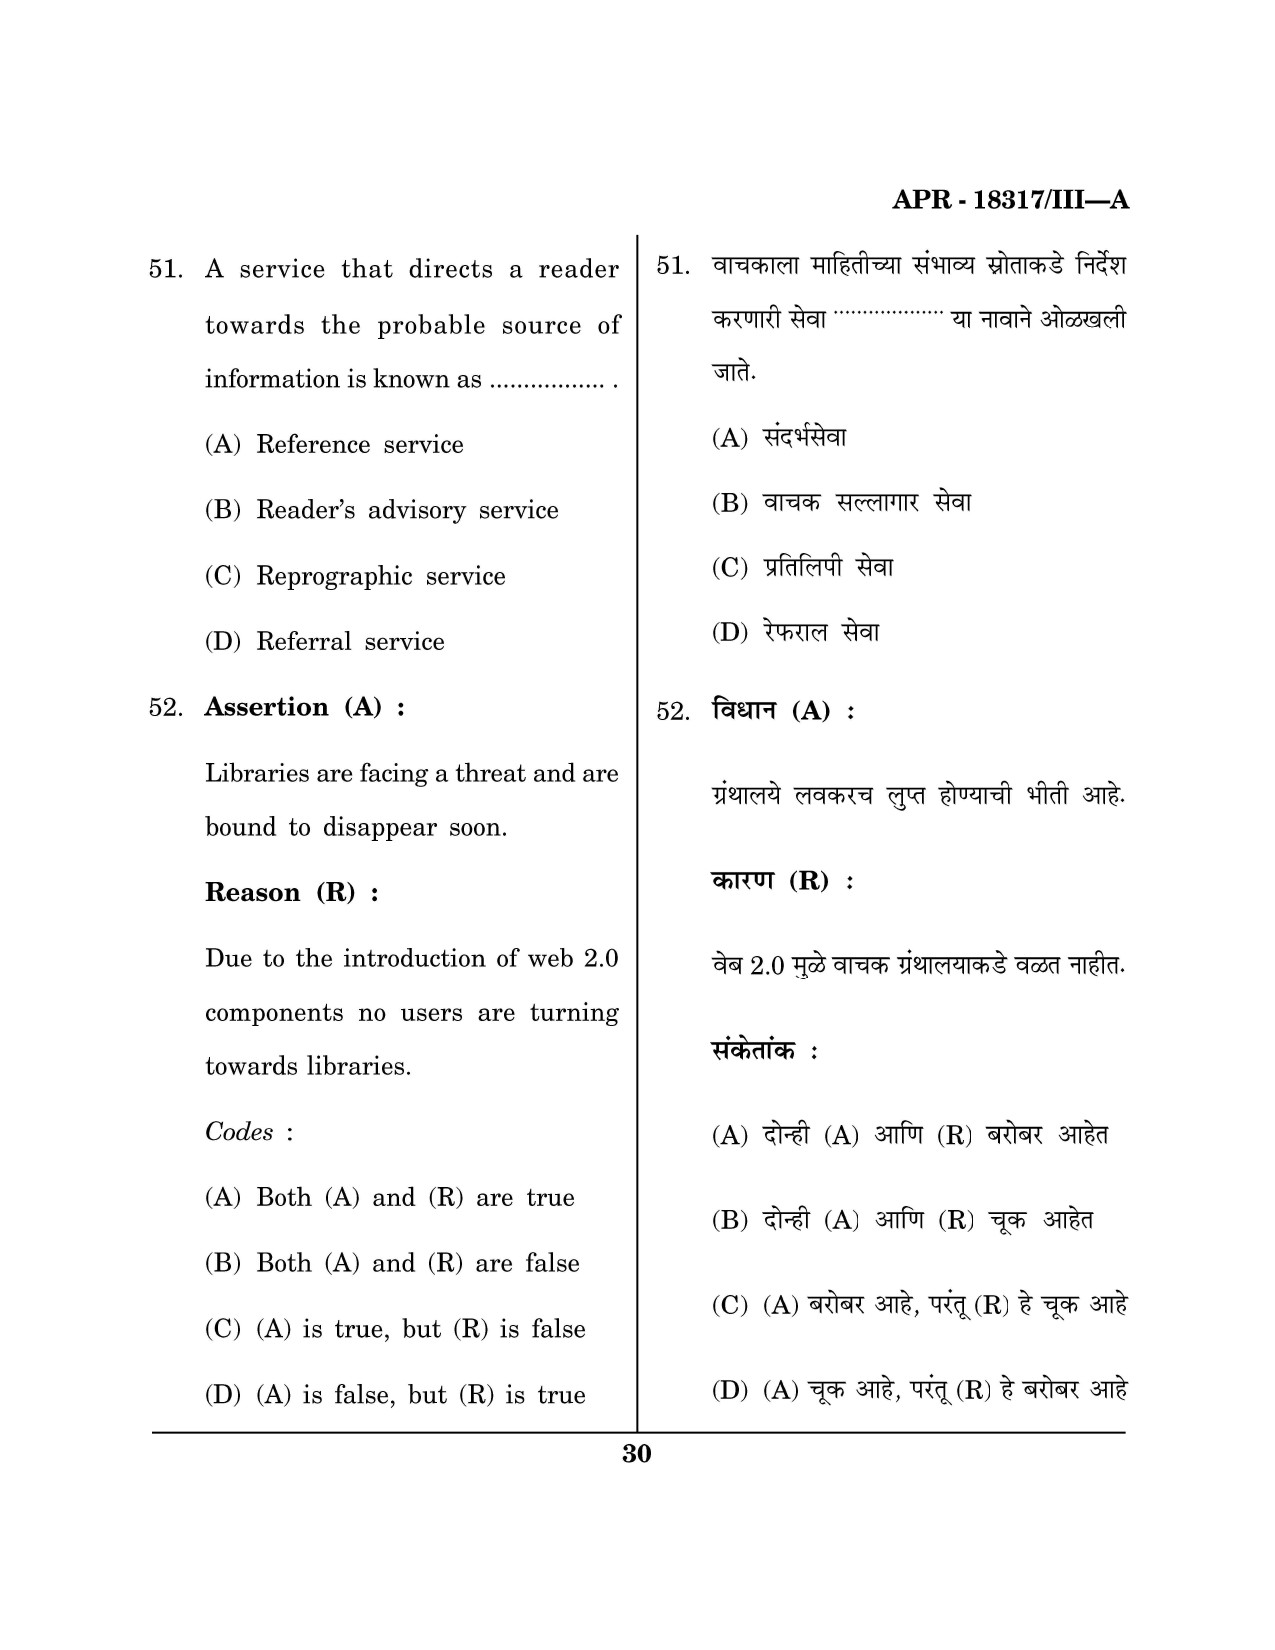 Maharashtra SET Library Information Science Question Paper III April 2017 29